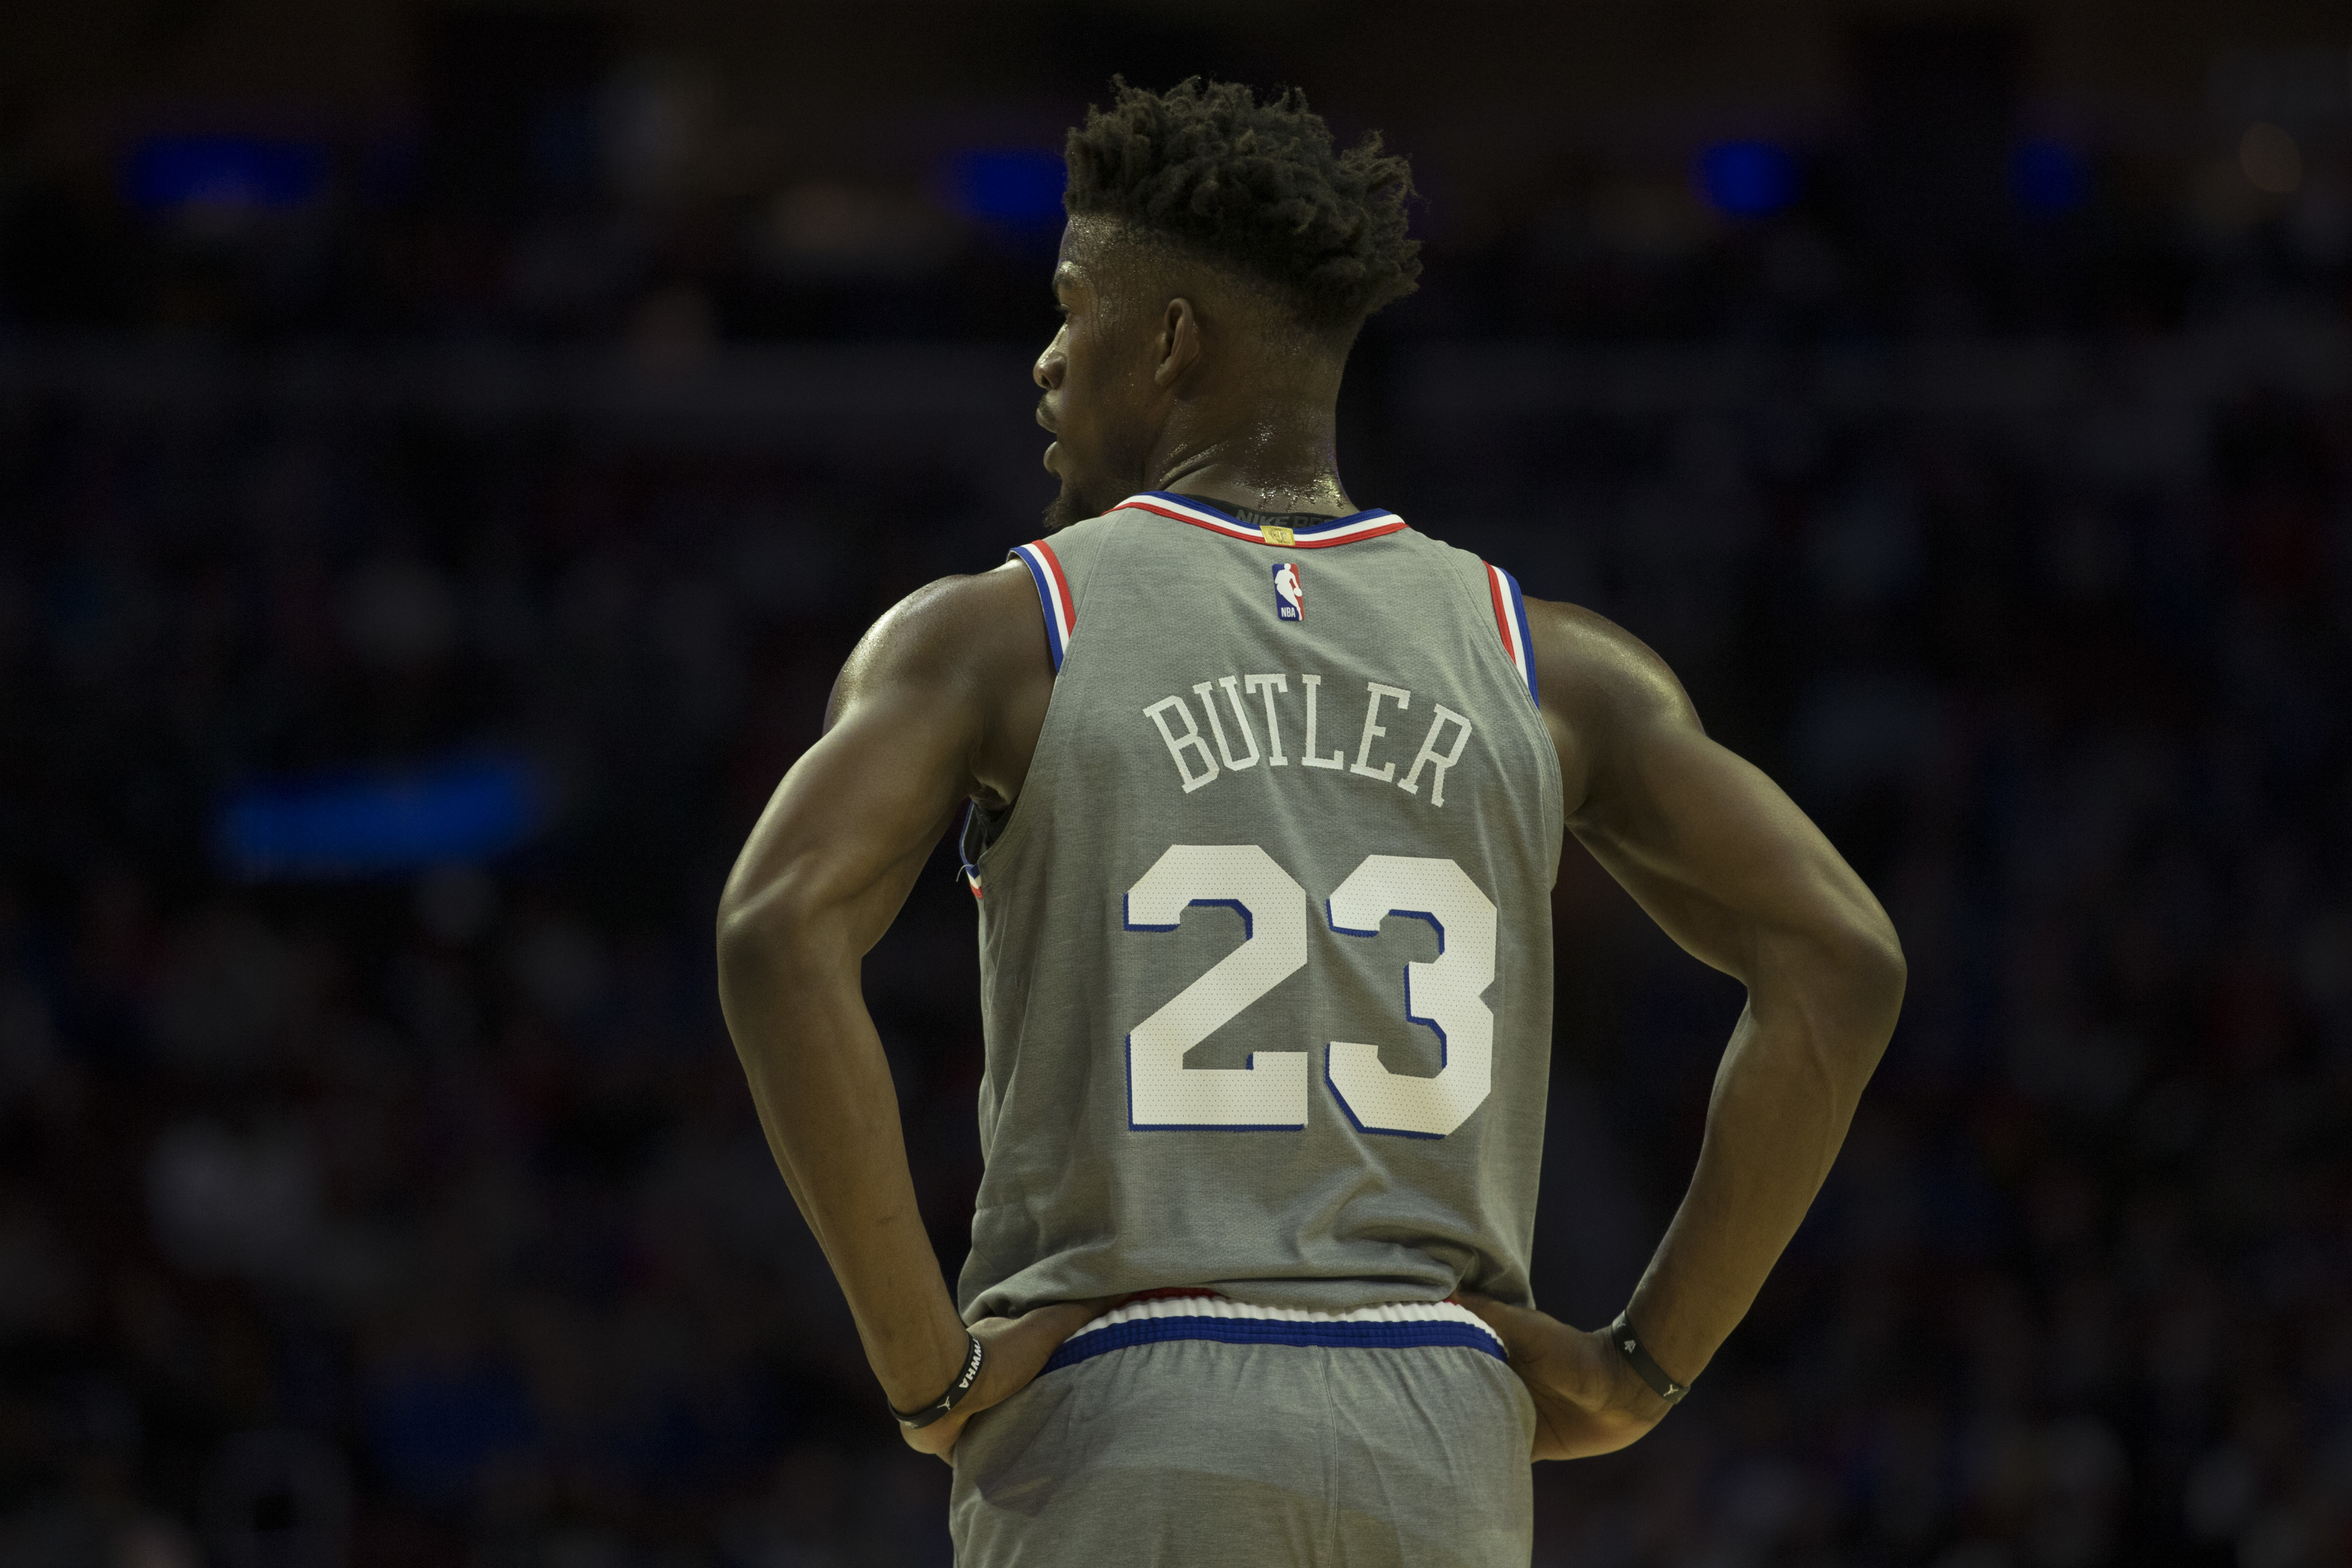 sixers jimmy butler jersey